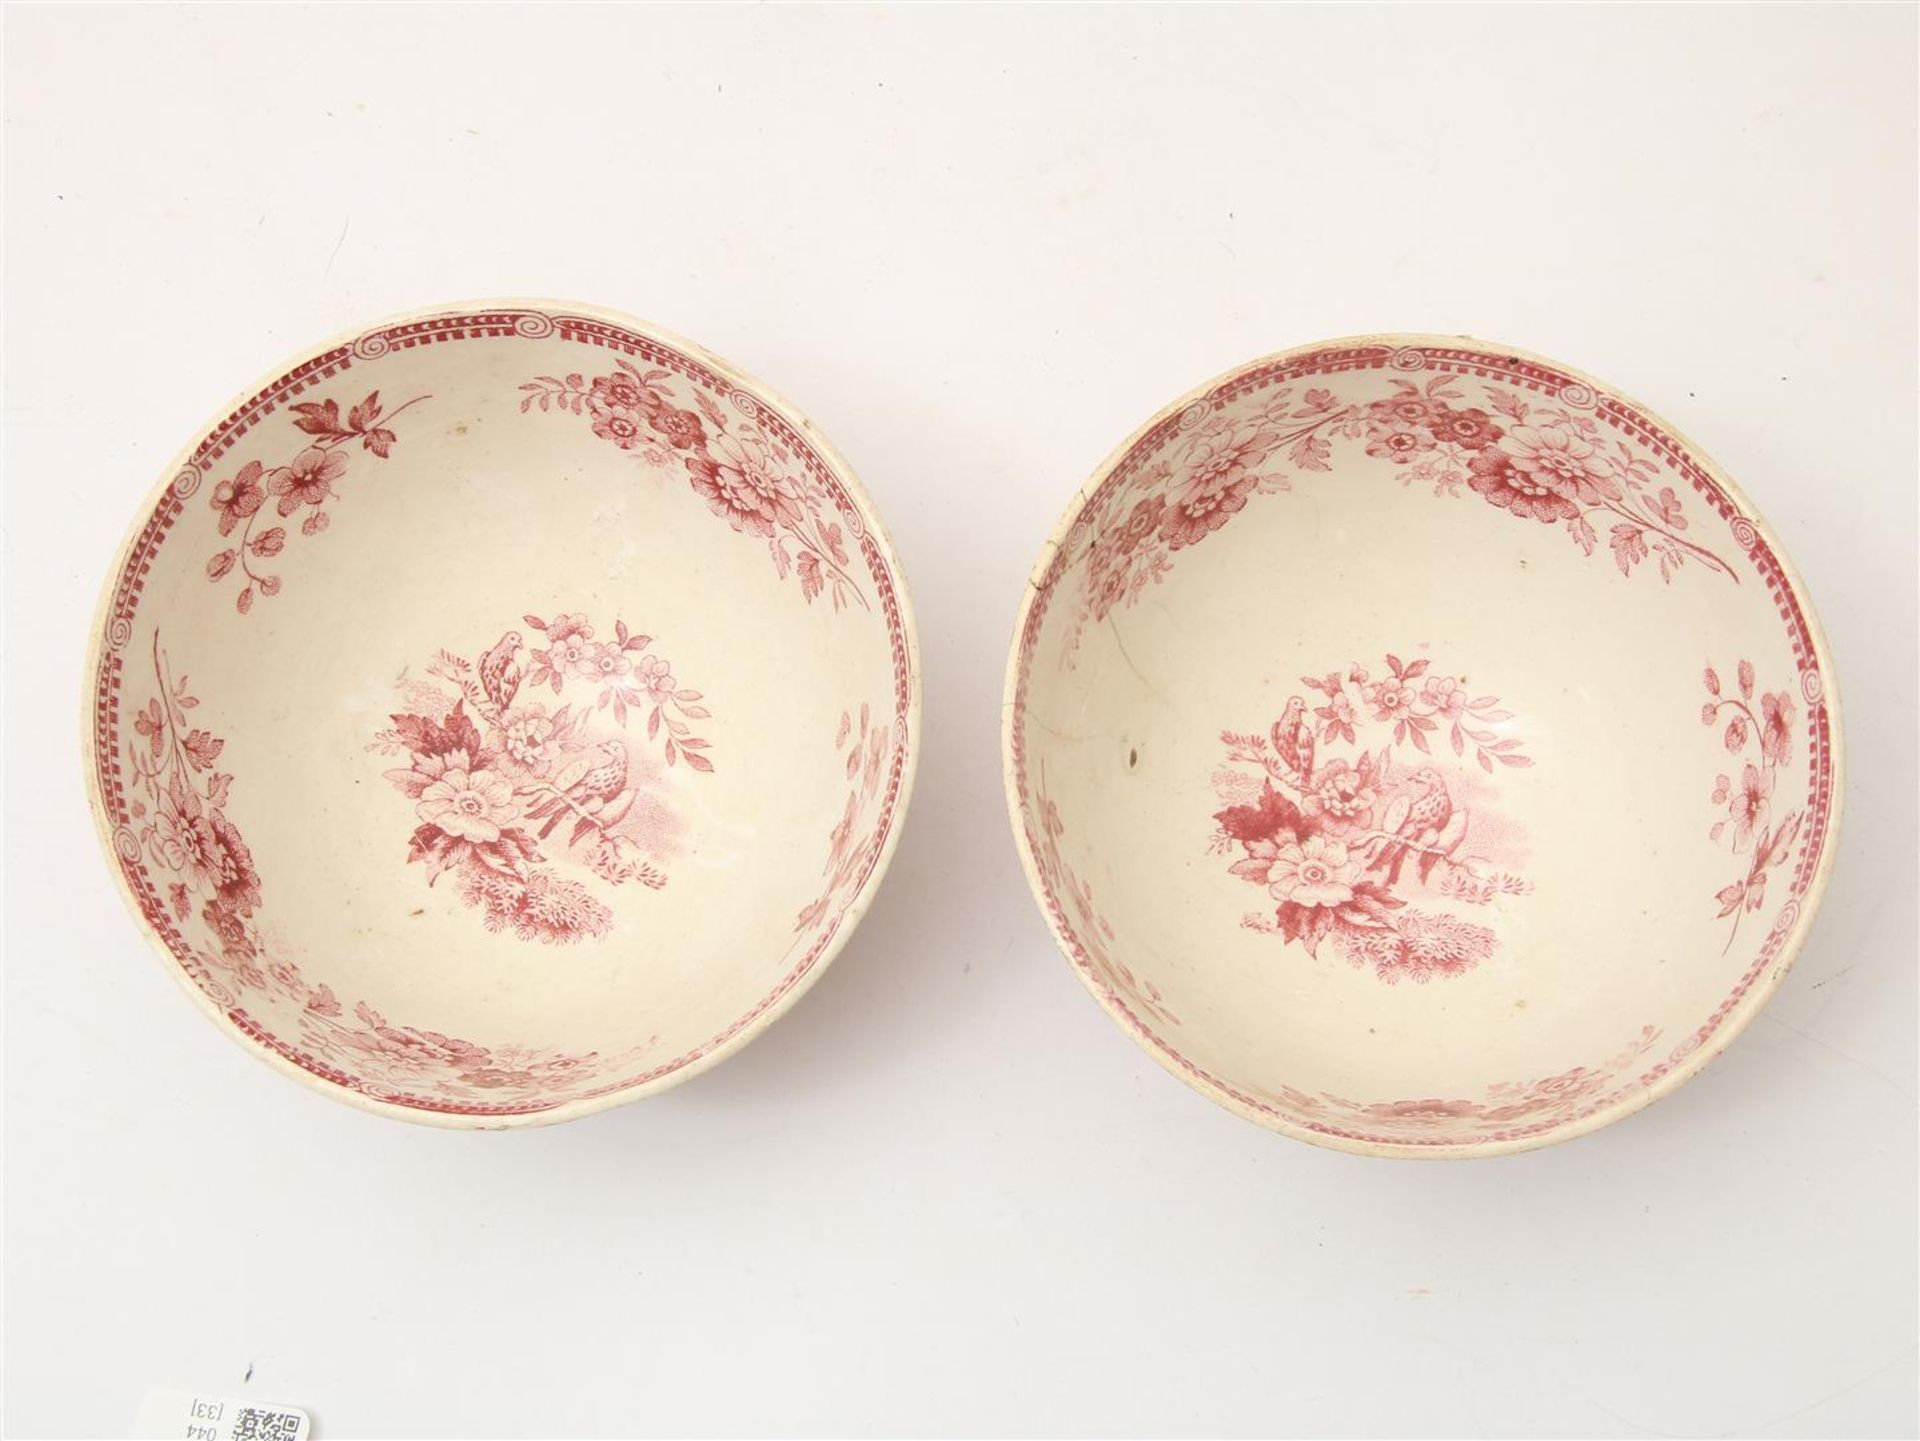 Lot of 5 earthenware cups and saucers, marked Petrus Regout ca. 1855-1880, 5 earthenware cups and - Image 12 of 16